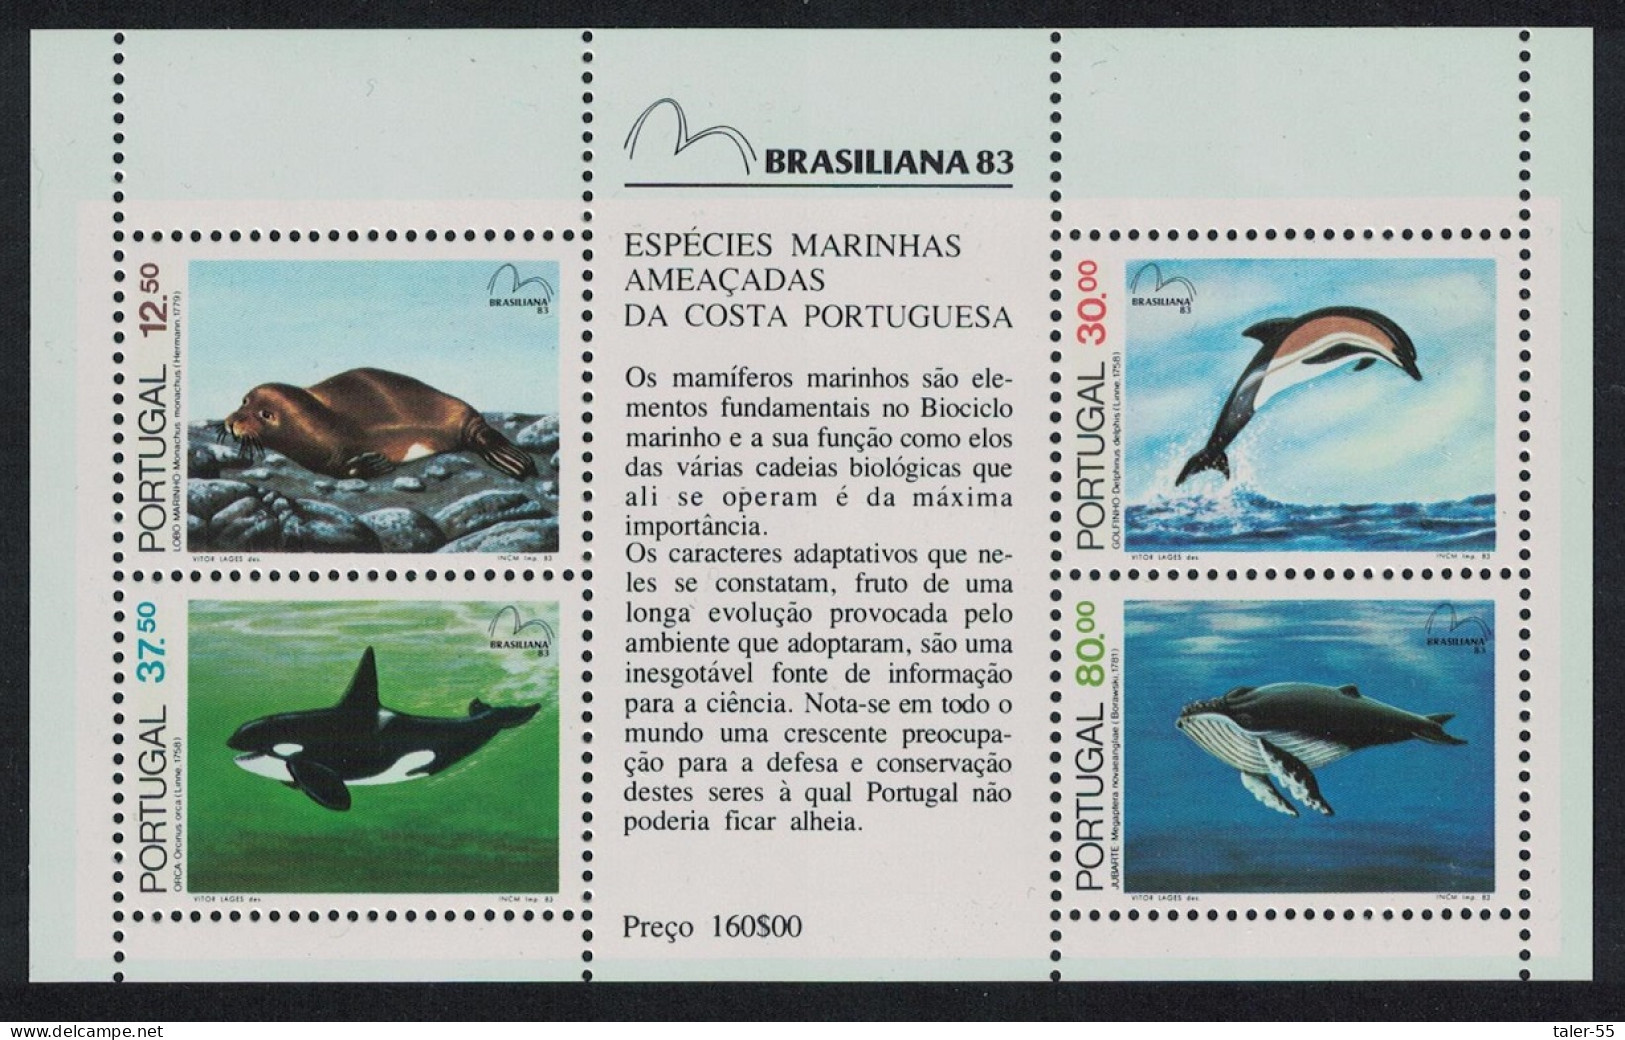 Portugal Whales Dolphins Monk Seal Brasiliana 83 MS 1983 MNH SG#MS1932 - Ongebruikt